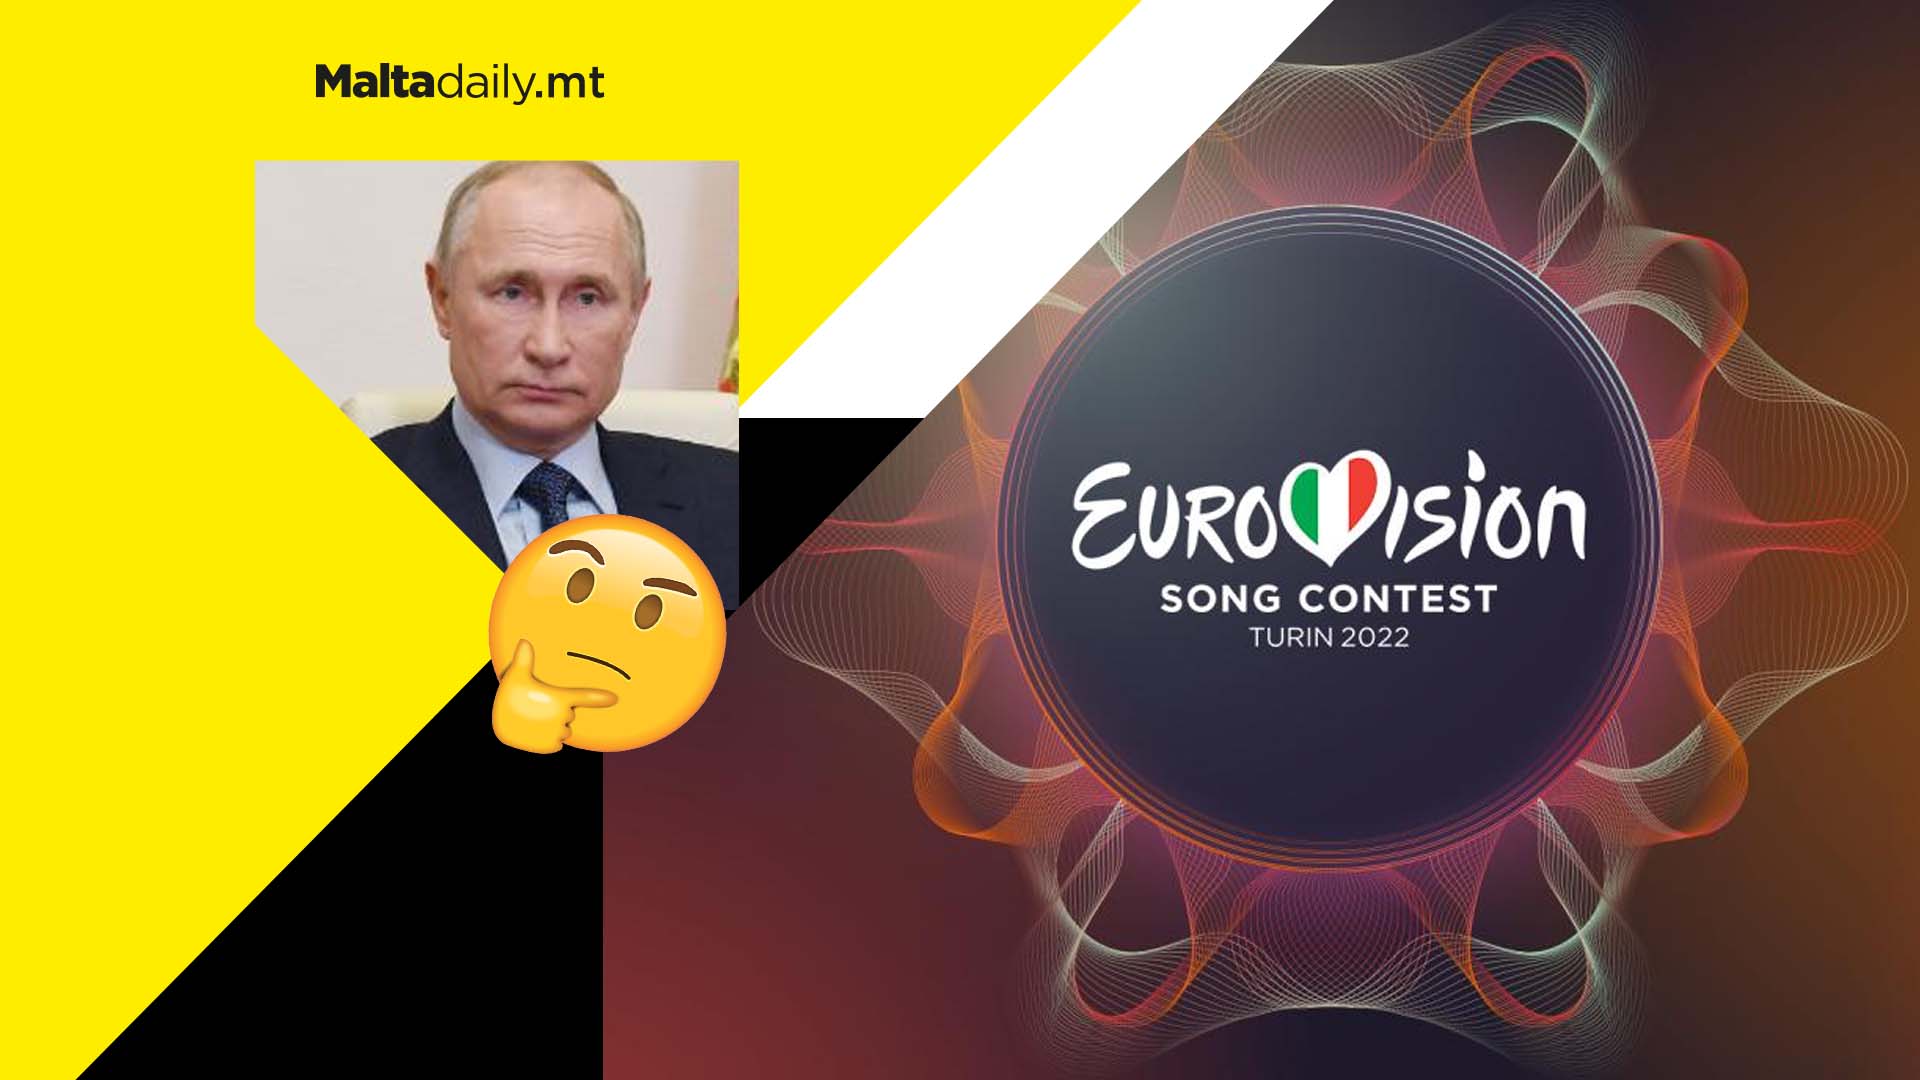 Russia banned from participating in Eurovision Song Contest 2022